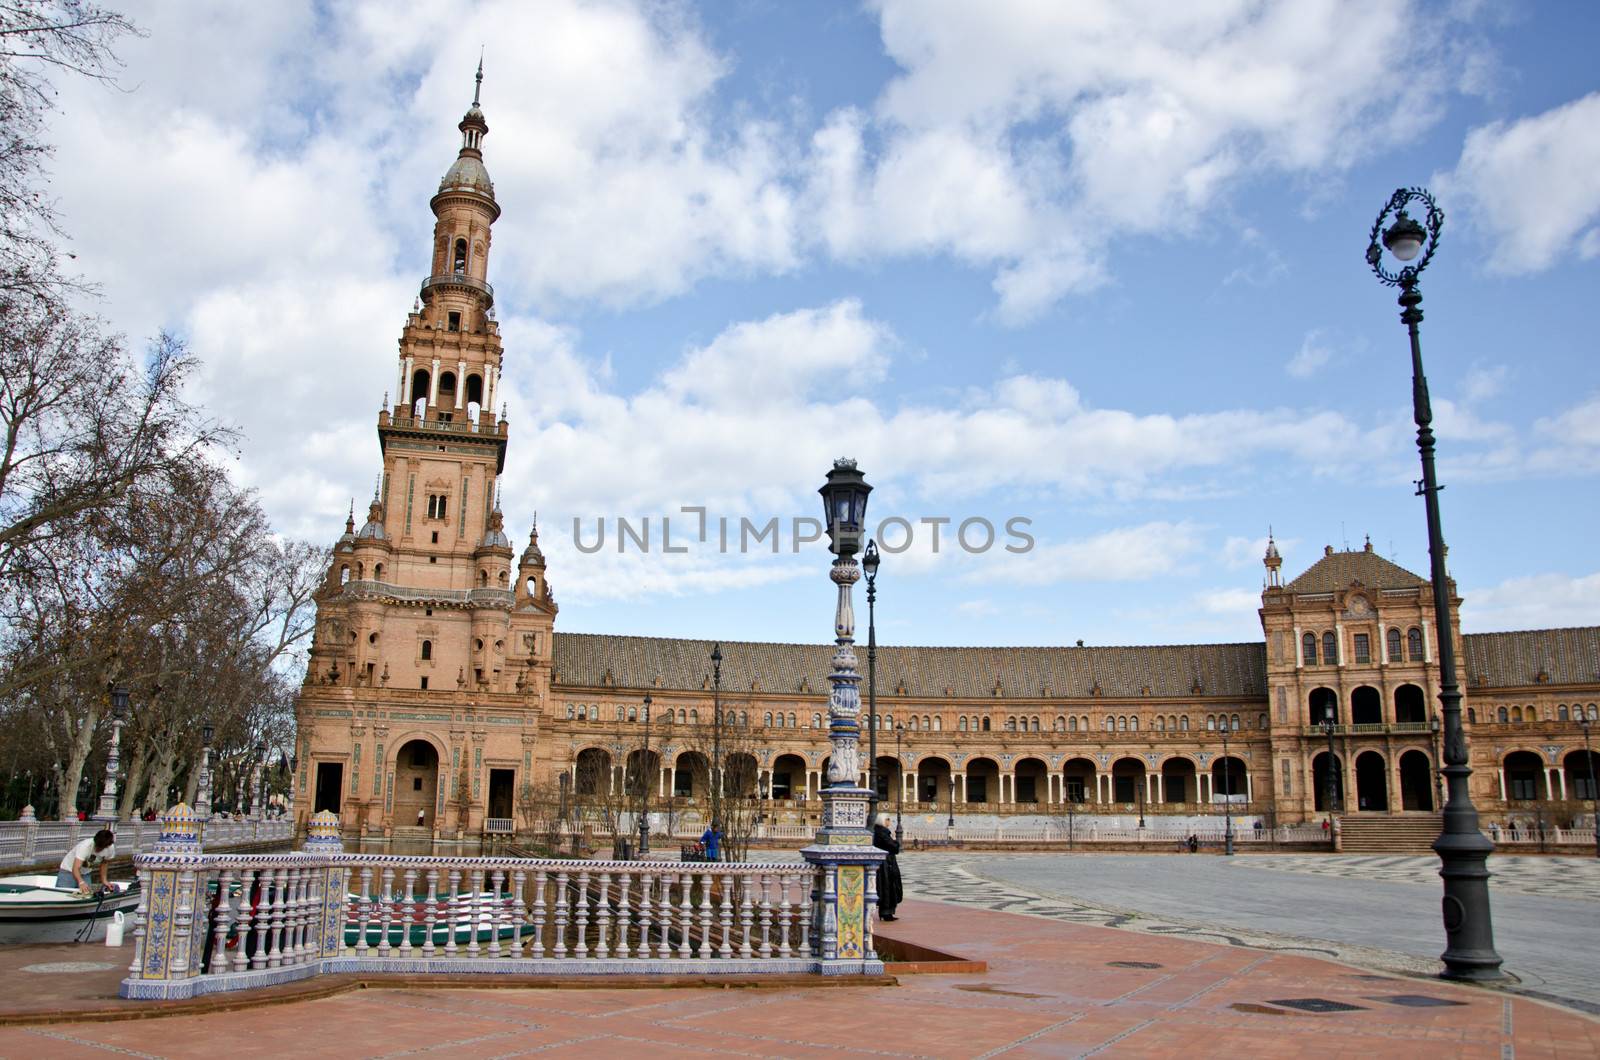 Plaza of Spain, Seville by lauria